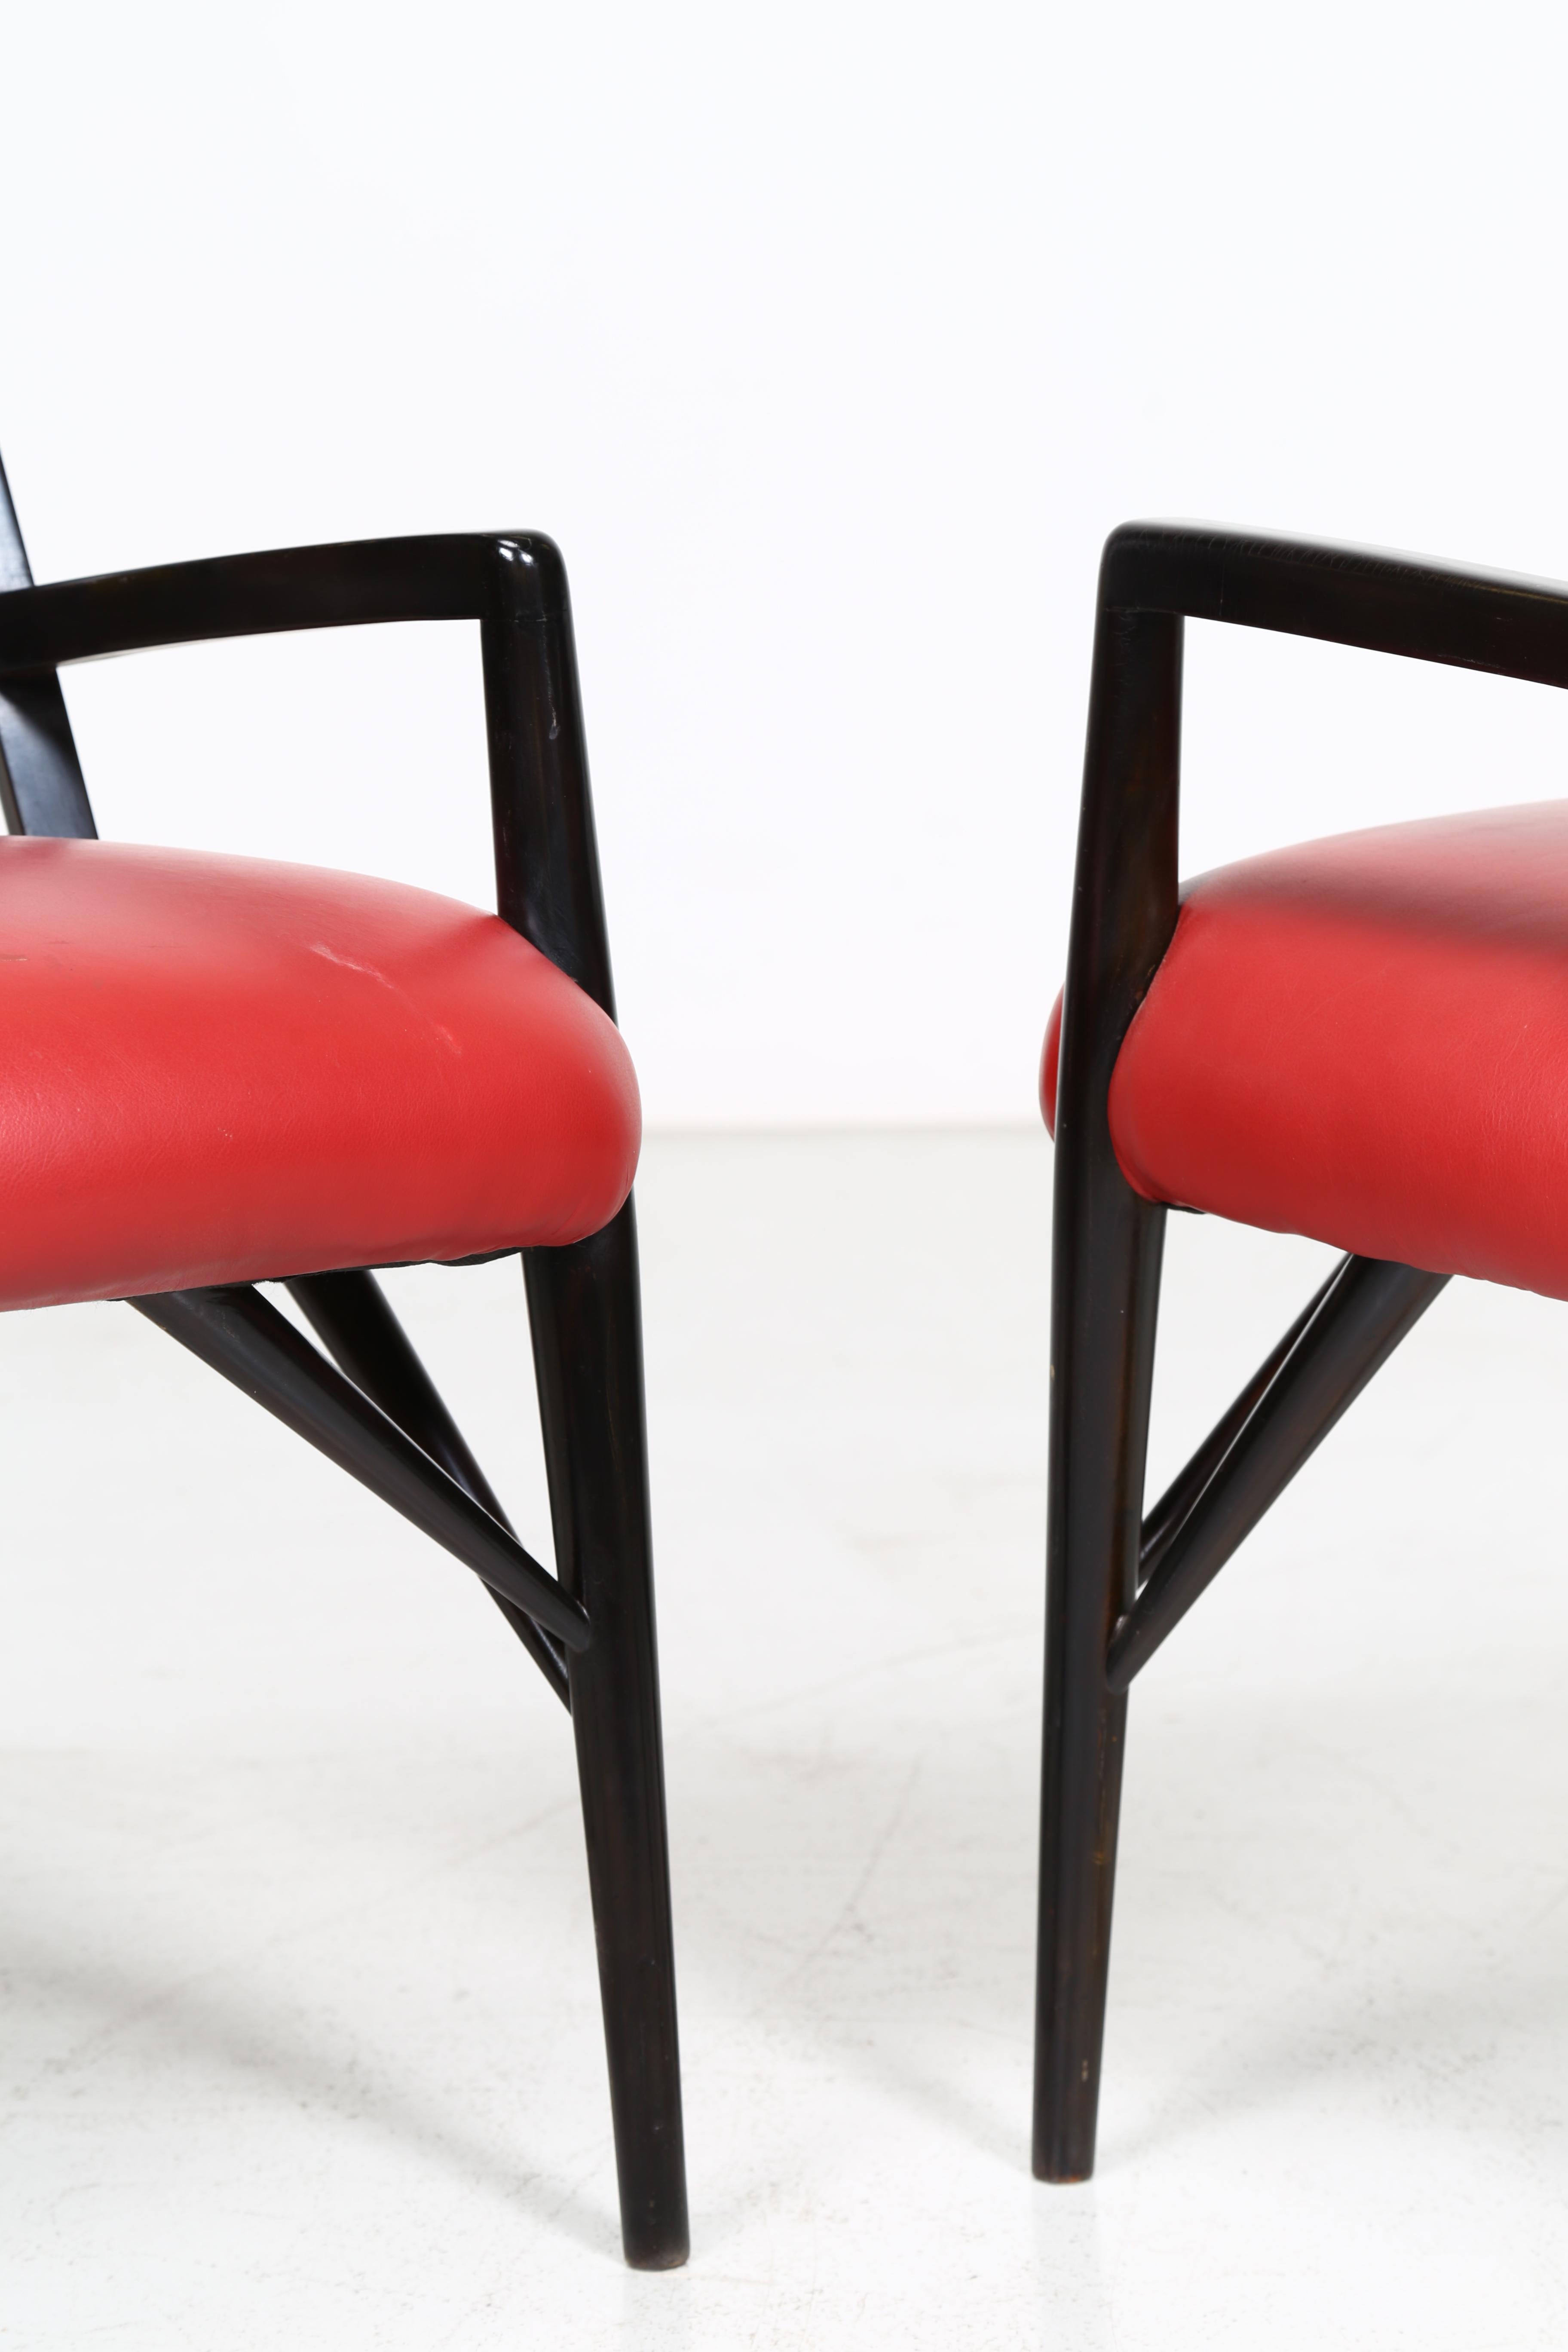 Finished in black lacquered wood with spindle backs, open arms, and architectural supports. Red upholstered seats. *Similar chairs were used in the interior of the Brentwood Country Club, as well as in the interiors of Mr. and Mrs. Fausto M. Ricci,